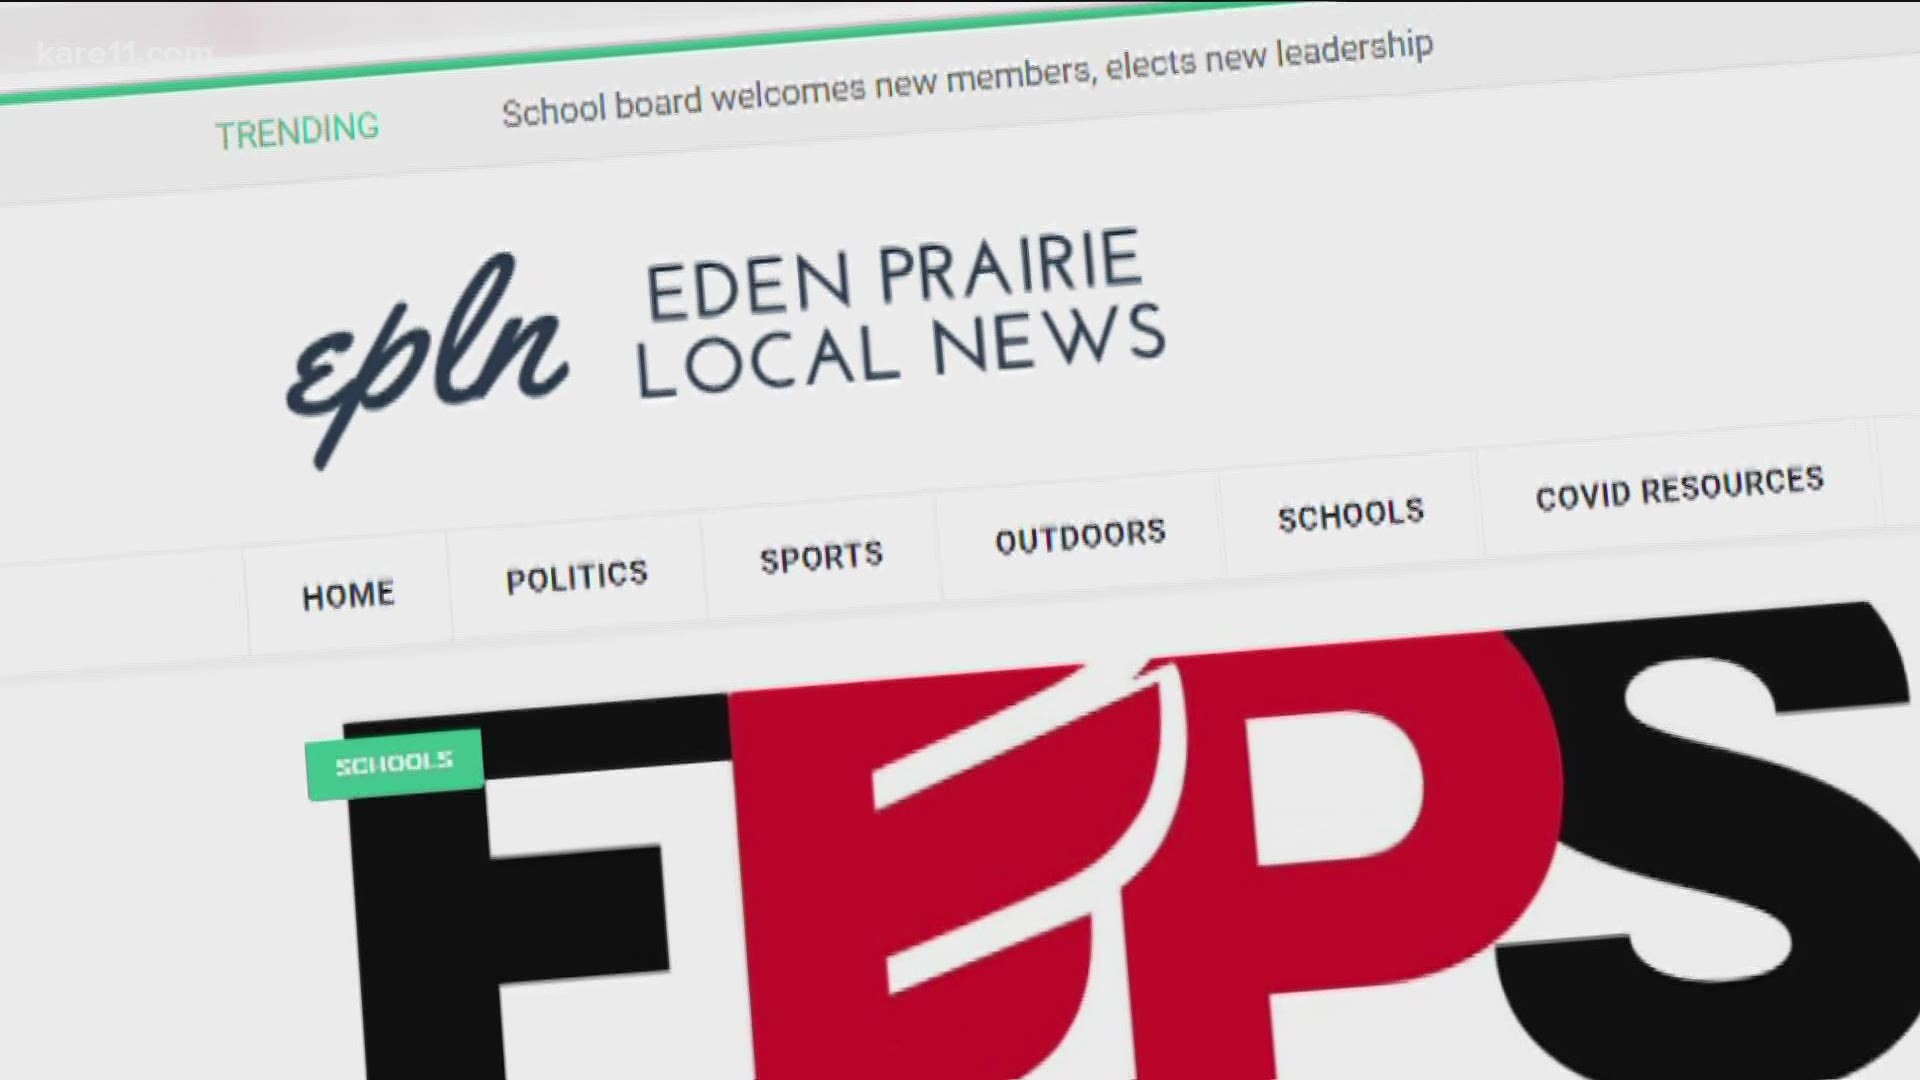 After the Eden Prairie News stopped the presses, a group stepped in to continue their local paper.